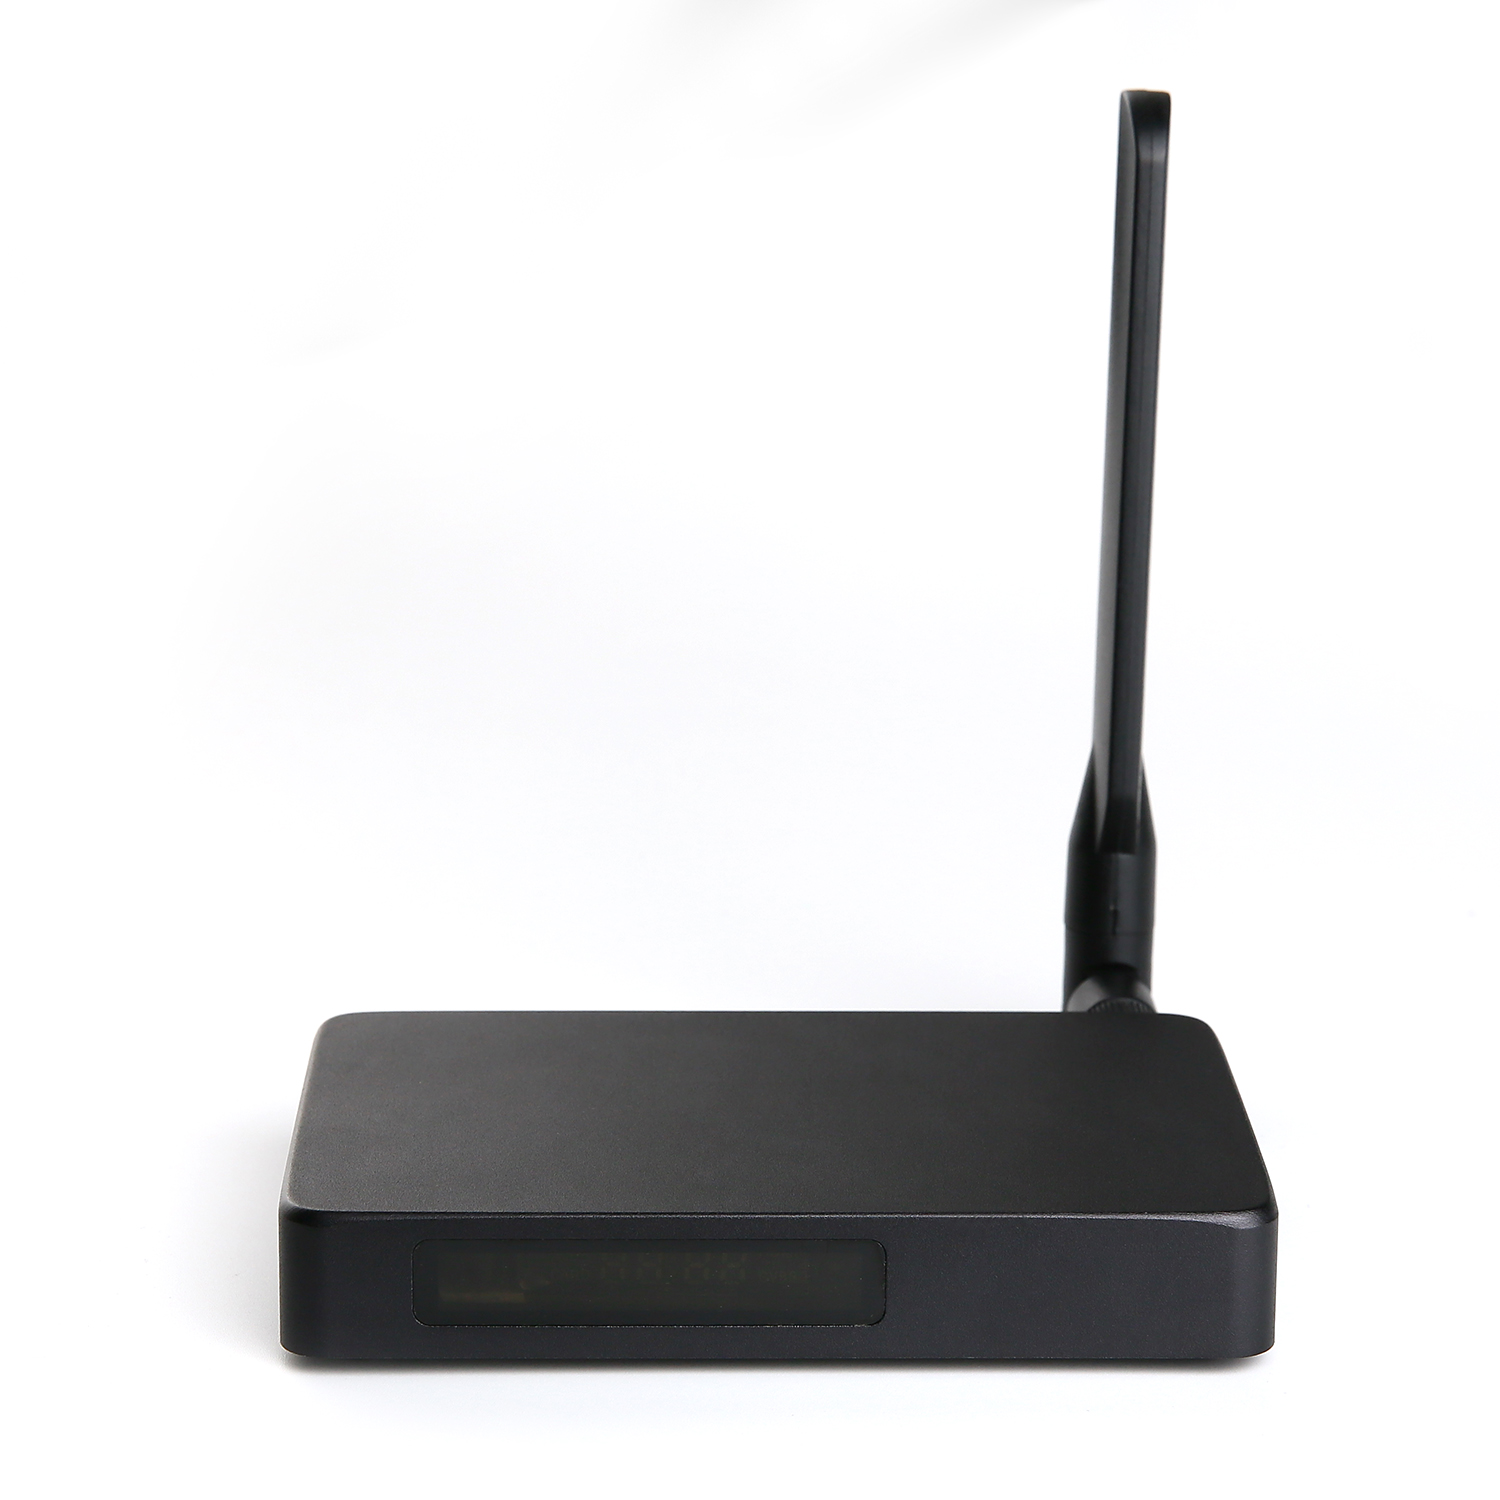 OEM TV Box Android manufacturer, OEM Android TV box suppliers